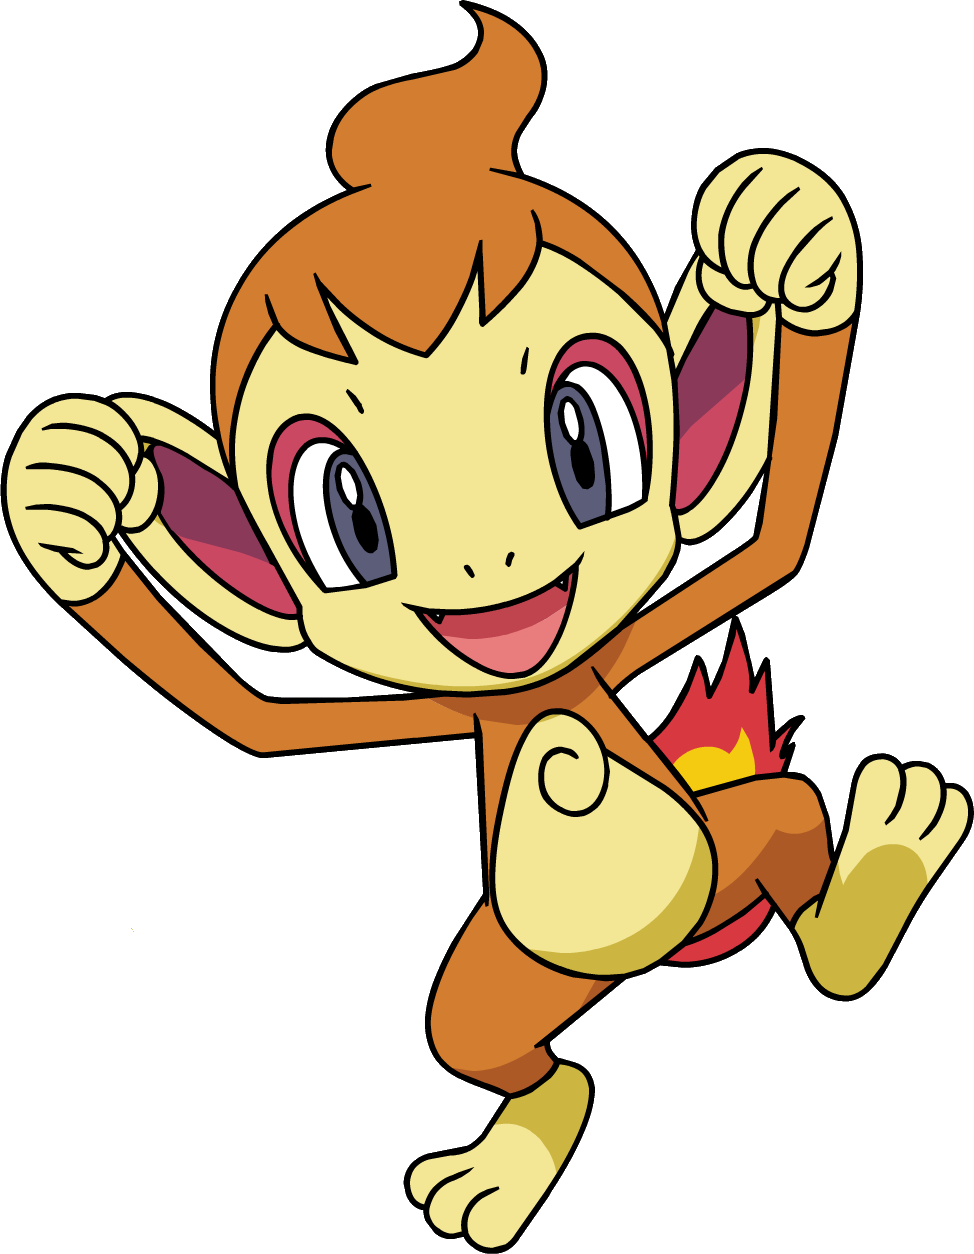 Chimchar Pokemon PNG HD Images